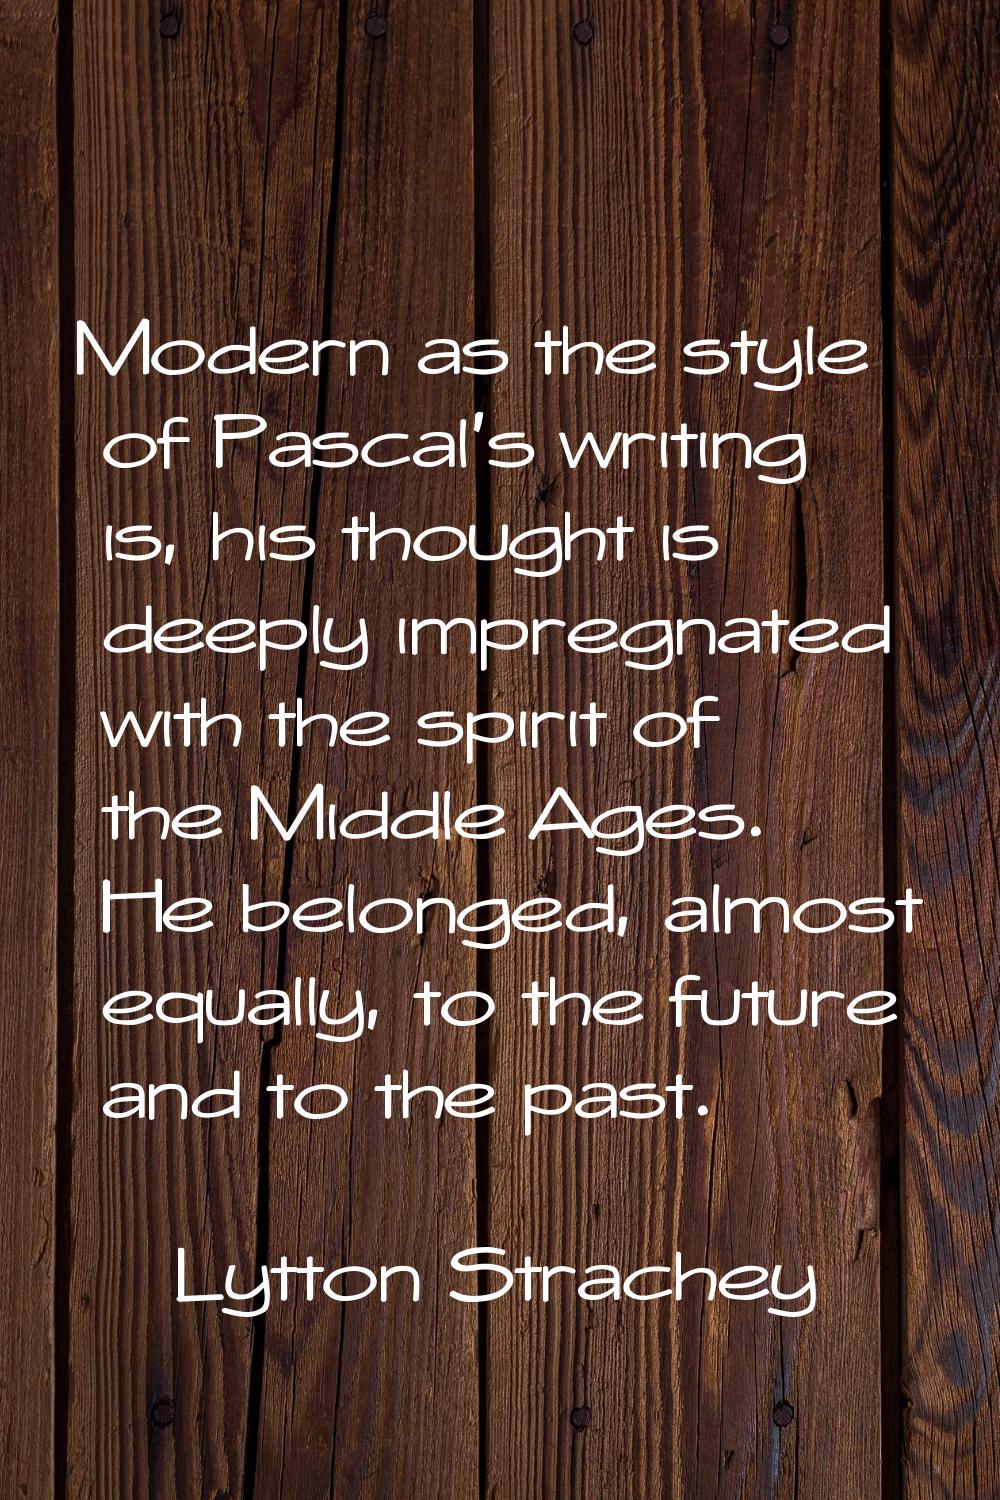 Modern as the style of Pascal's writing is, his thought is deeply impregnated with the spirit of th